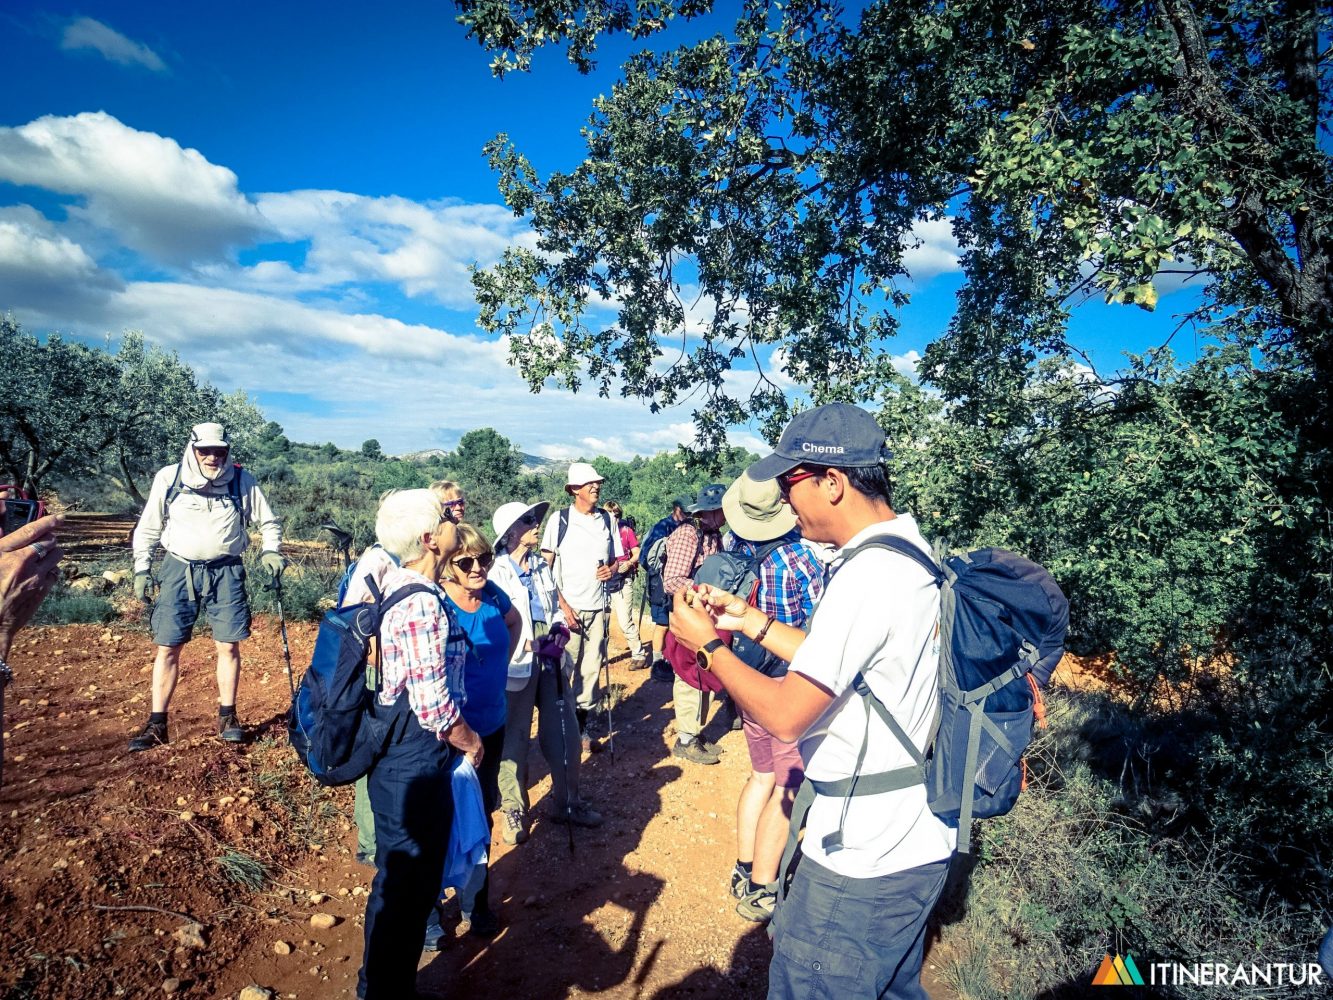 A group of hikers at Itinerantur